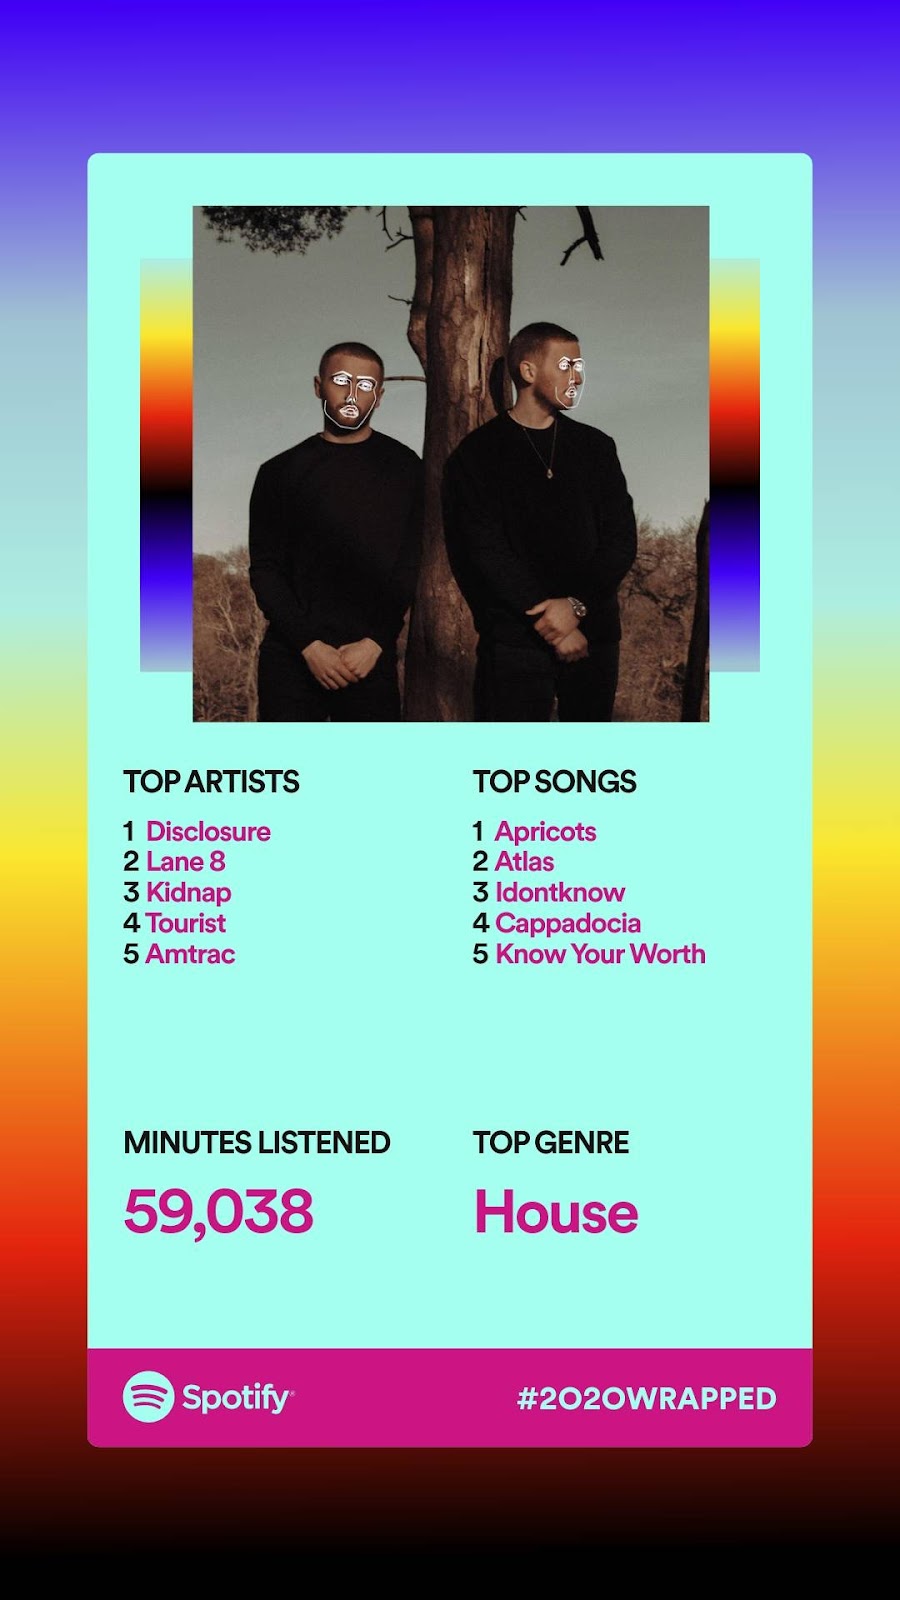 Screenshot of Spotify Wrapped header image, top artists of disclosure, lane 8, kidnap, tourist, and amtrac, top songs of apricots, atlas, idontknow, cappadocia, know your worth, minutes listened of 59,038 and top genre of house. 